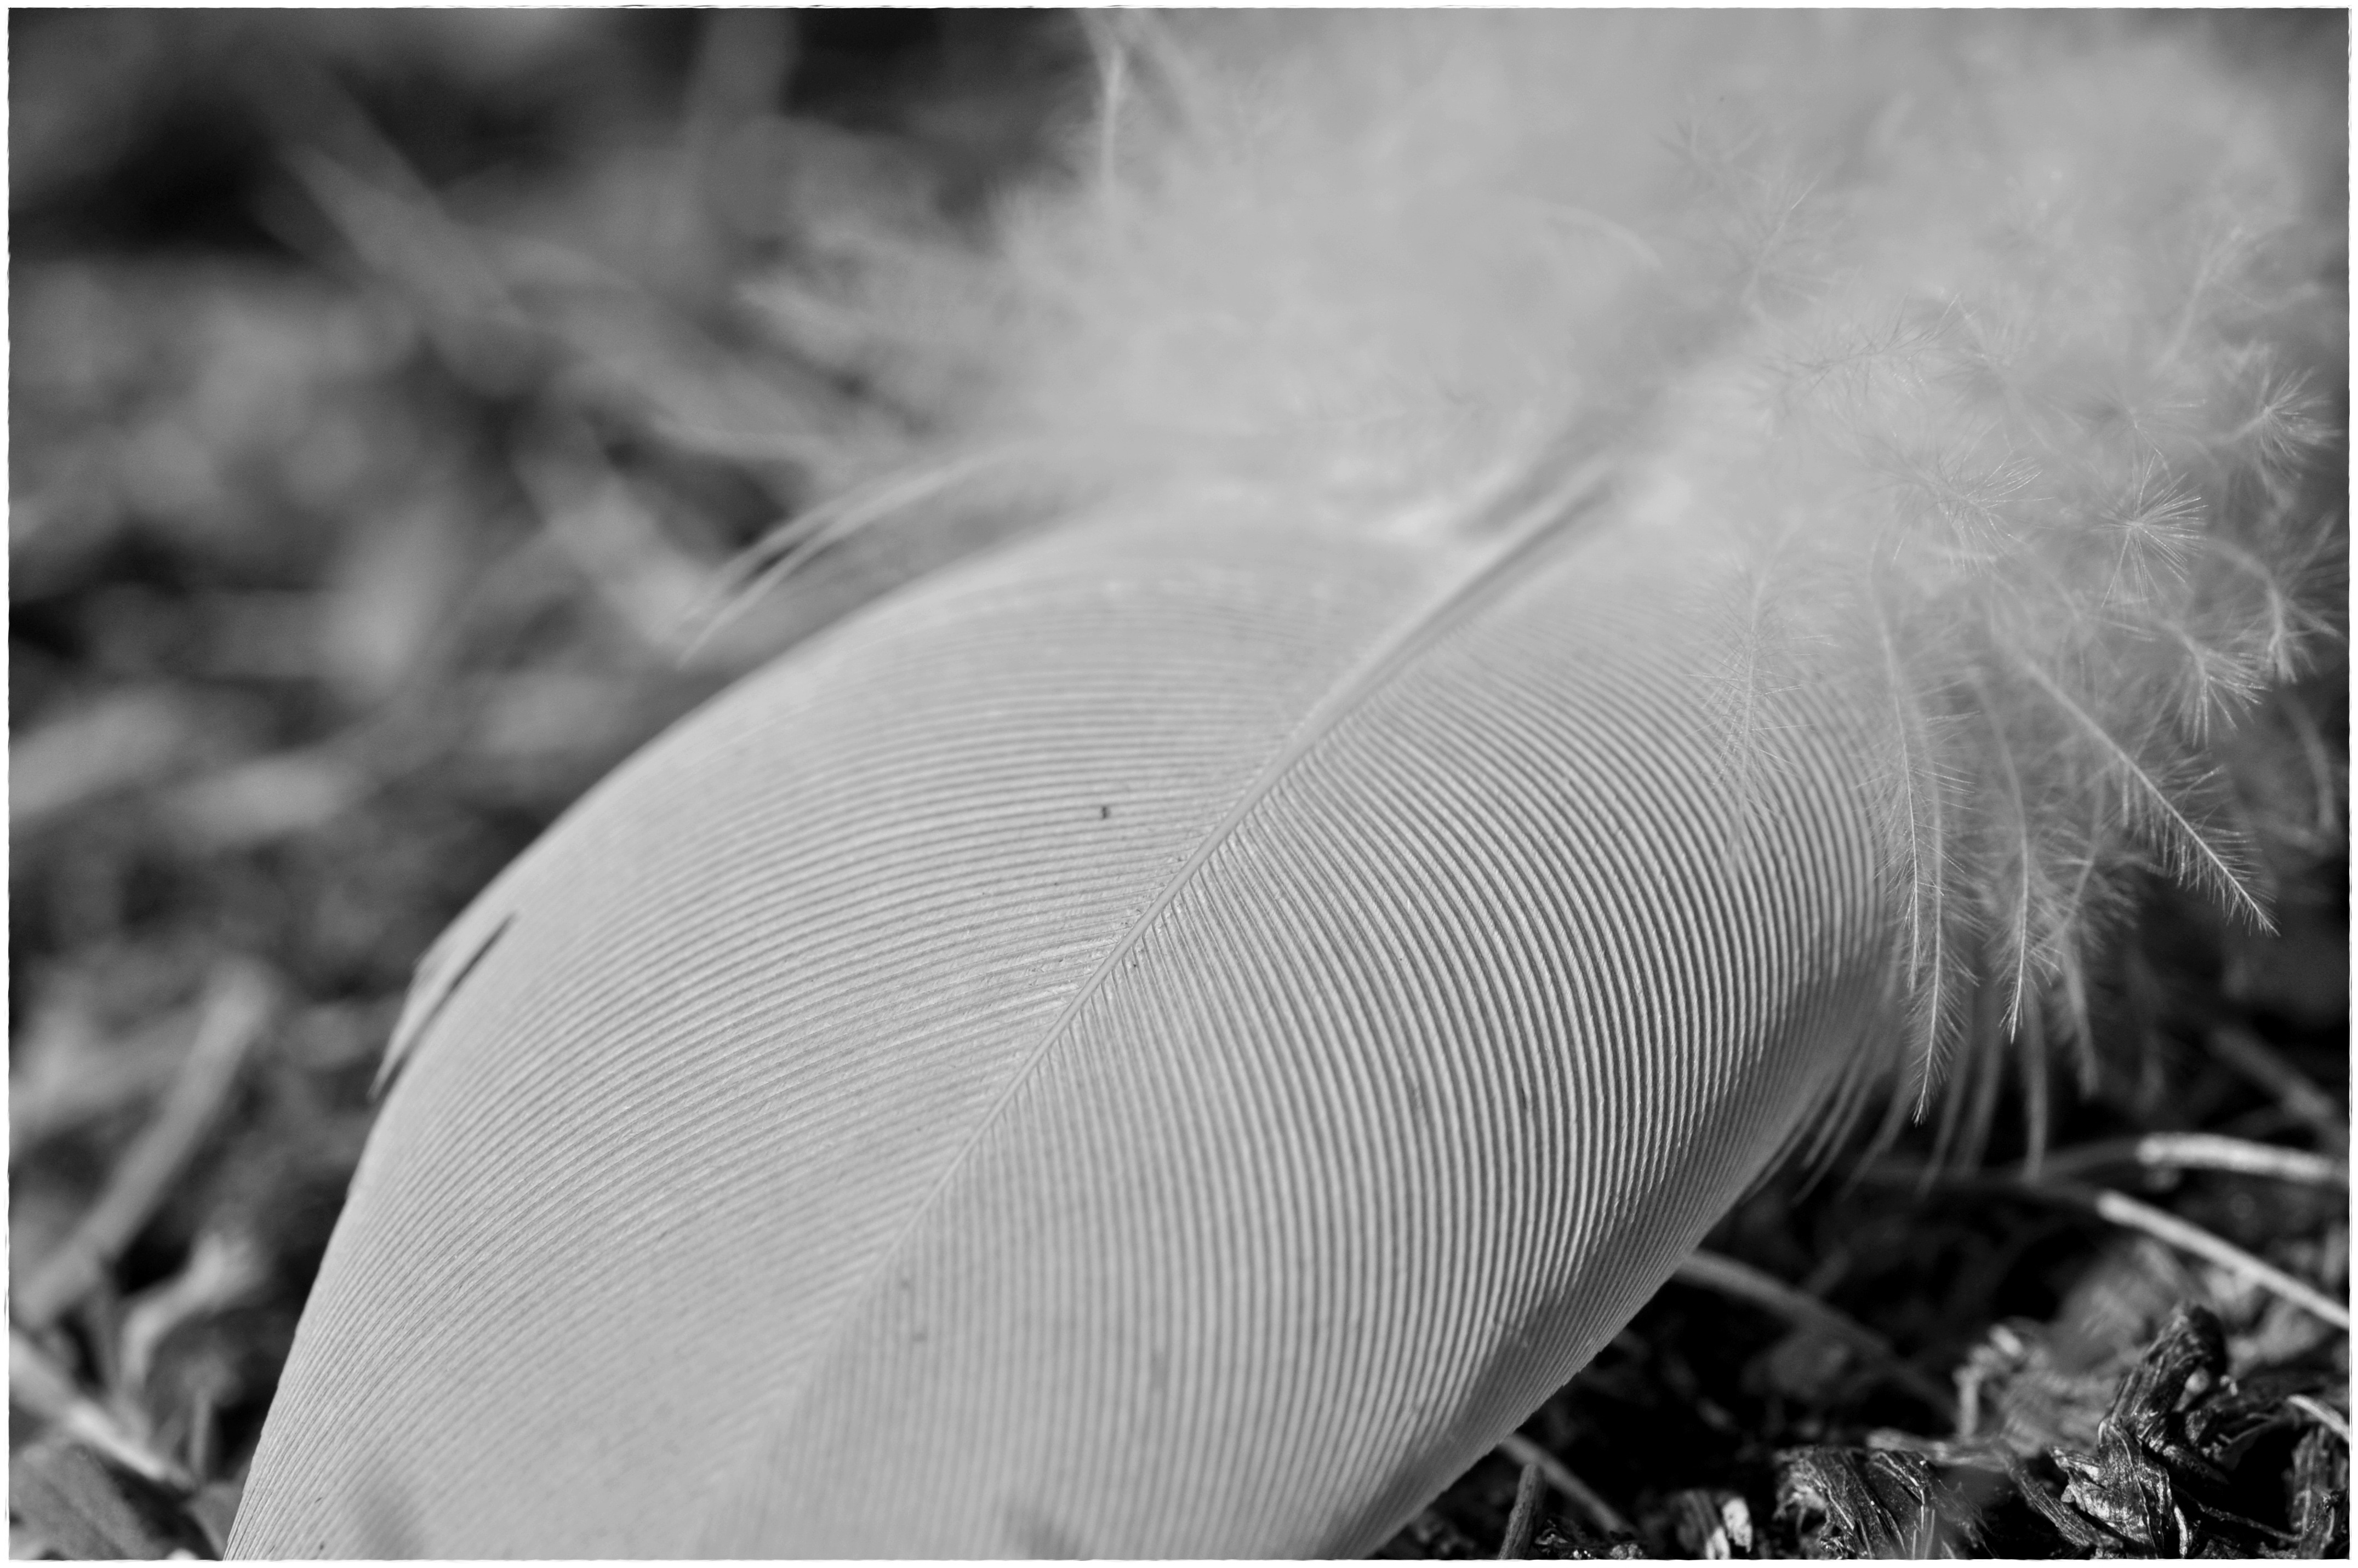 grayscale photography of feather